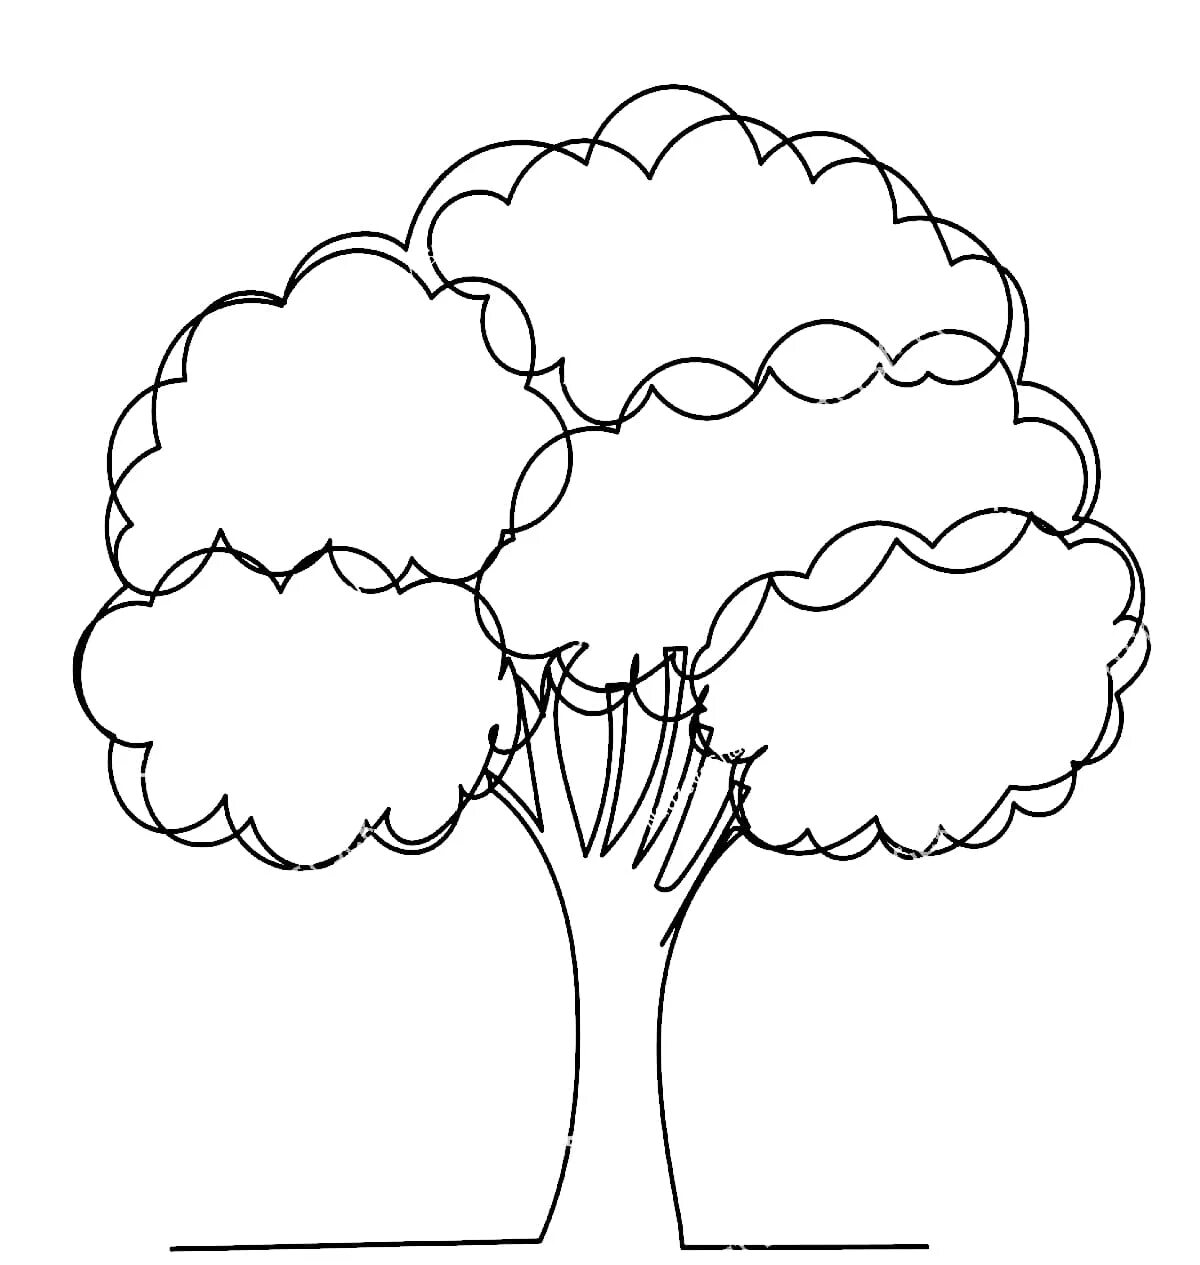 Big tree coloring book for 5-6 year olds